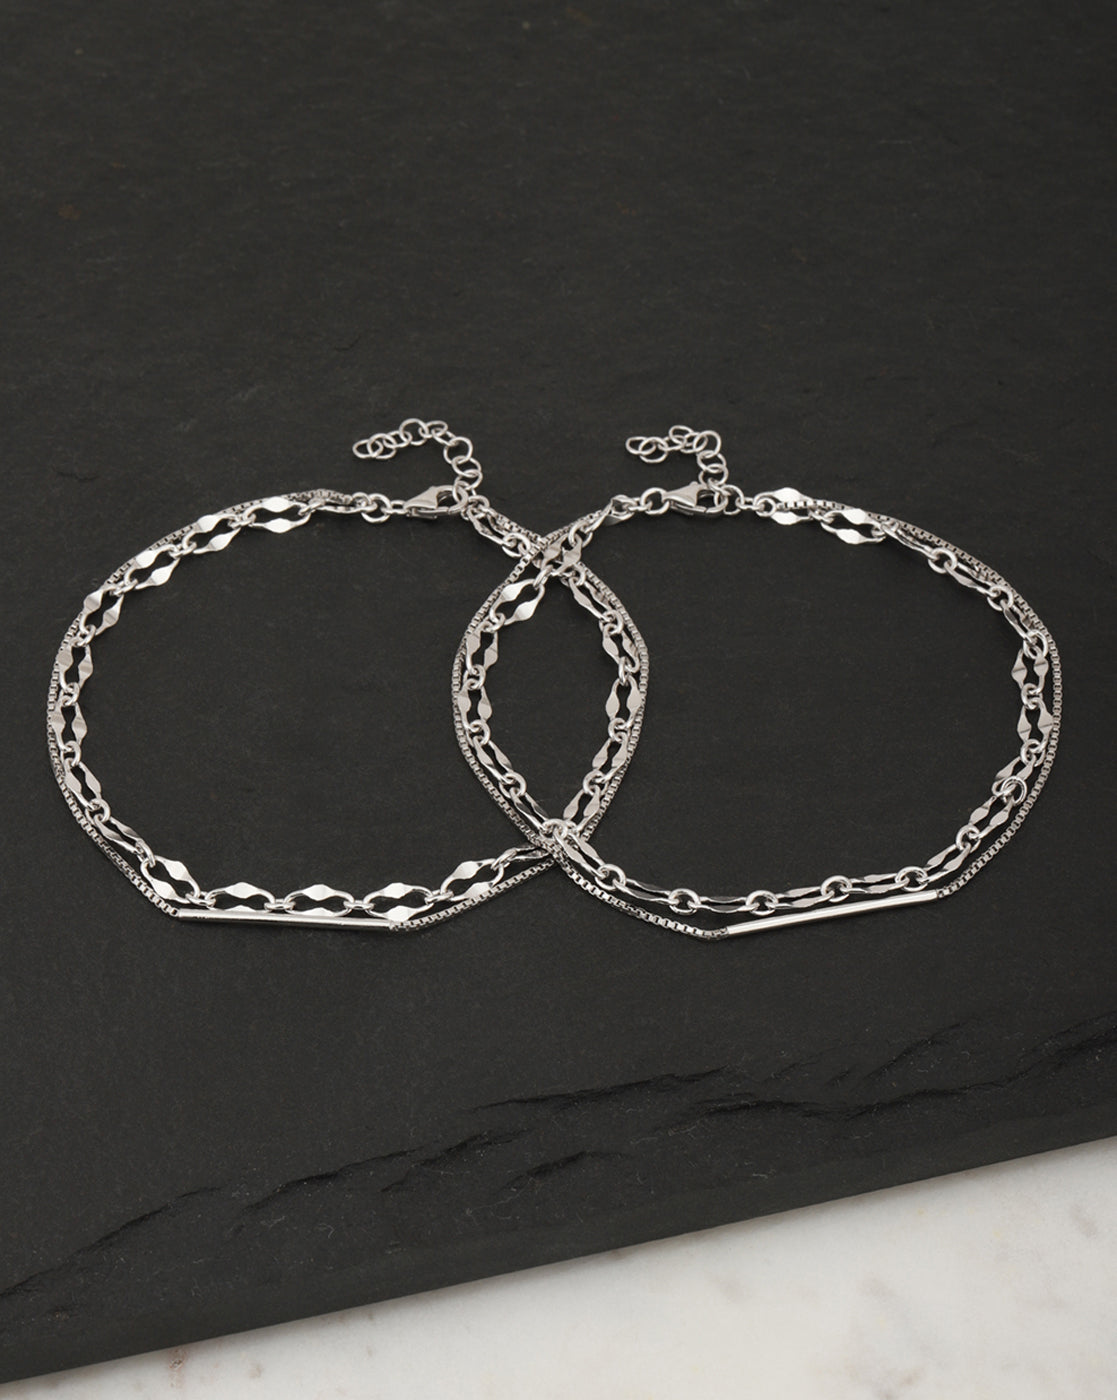 Carlton London -Set Of 2 Rhodium-Plated Silver Toned Layered Anklets For Women